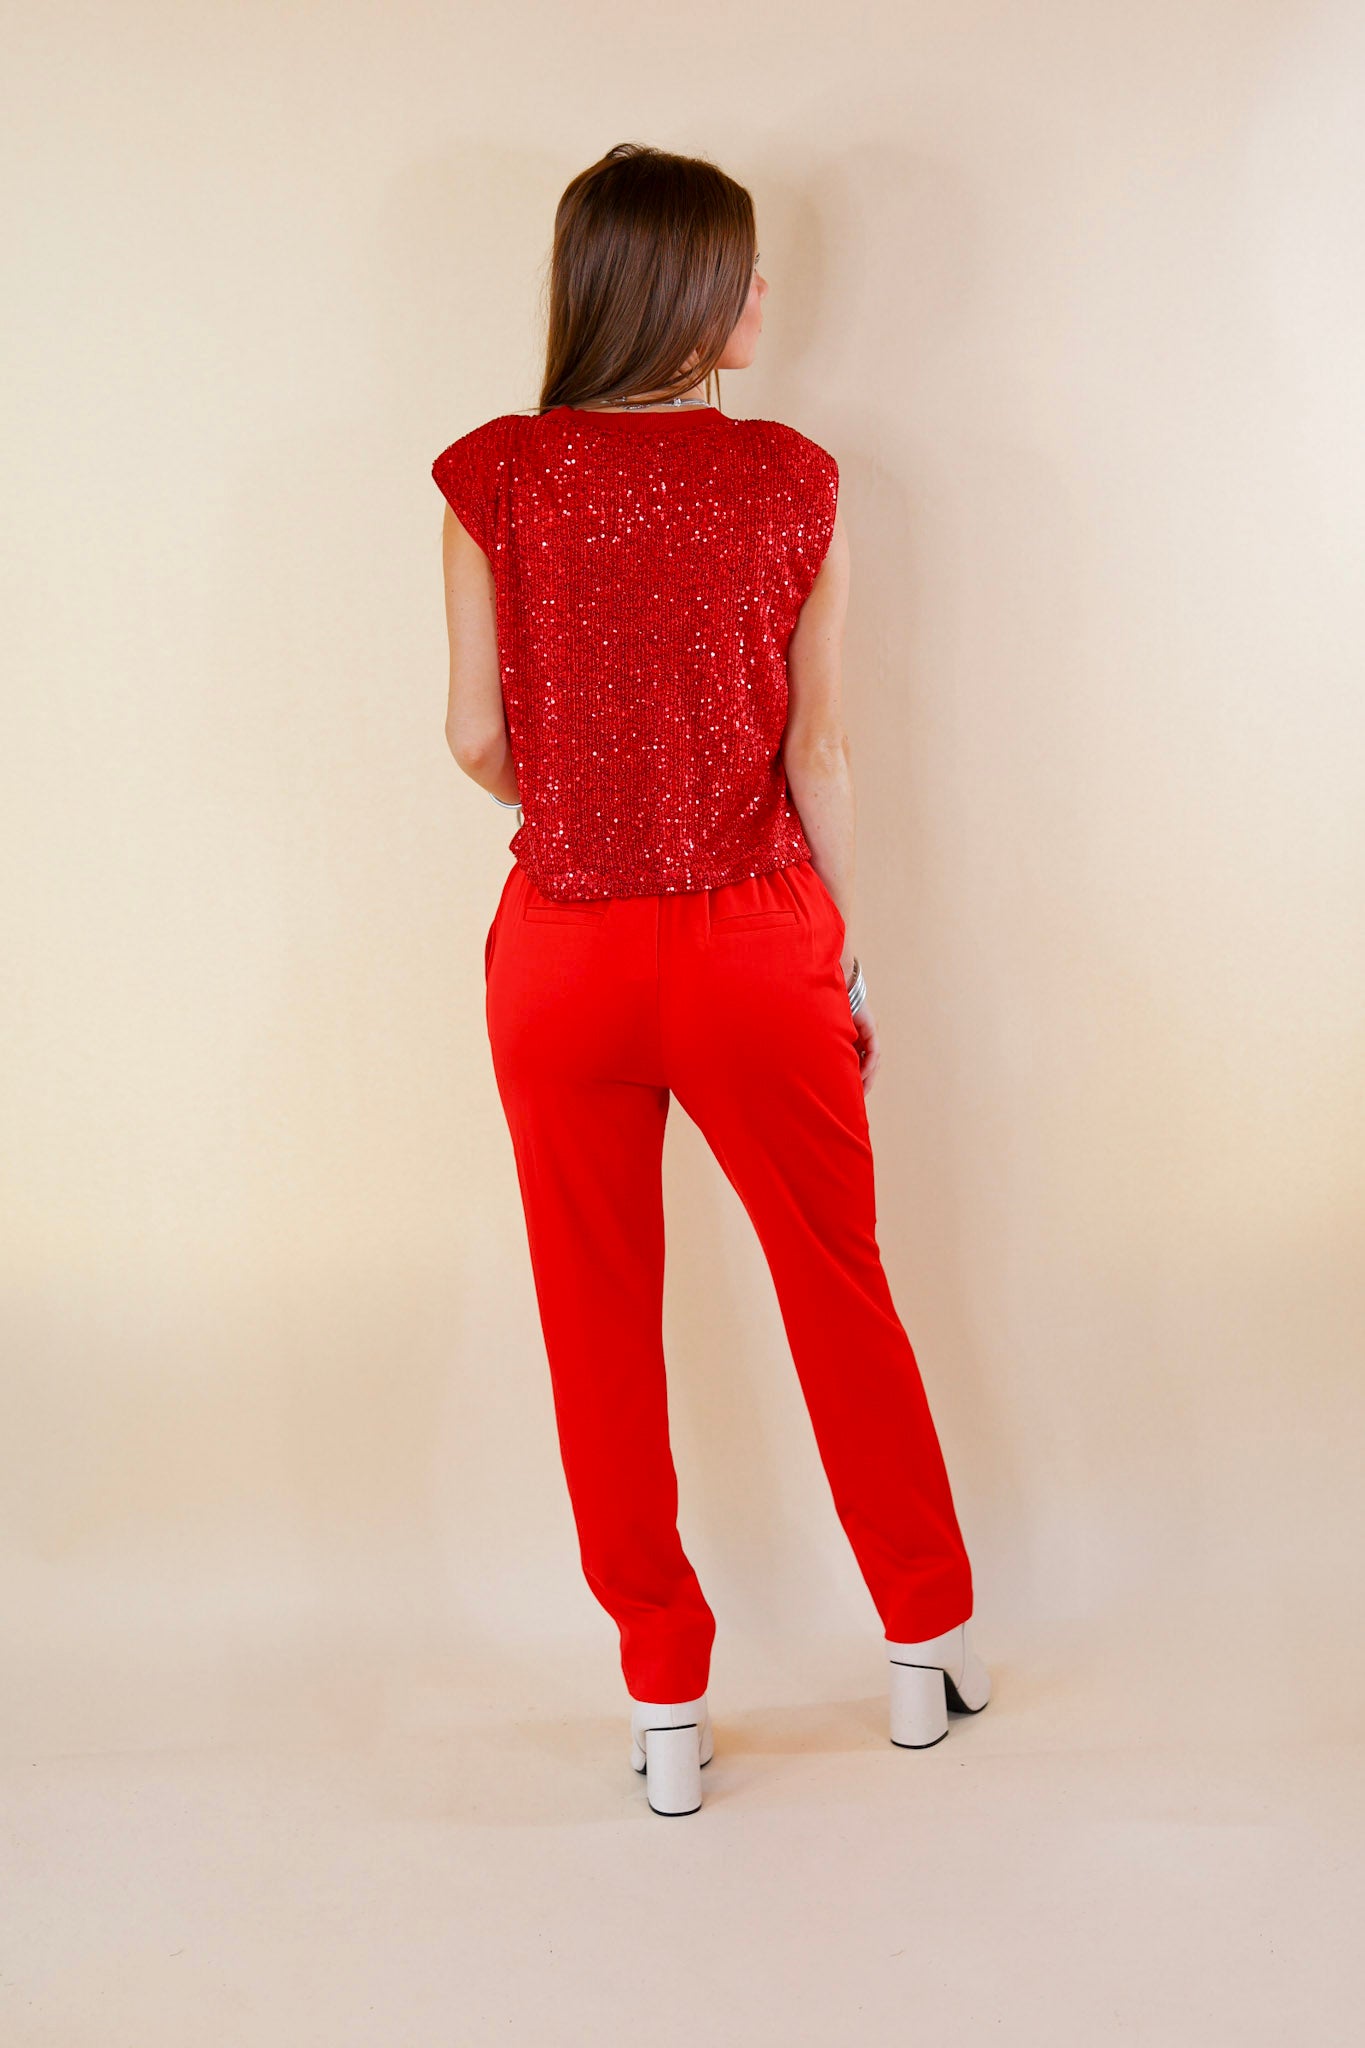 Sequin Sleek Red Sleeveless Top - Giddy Up Glamour Boutique